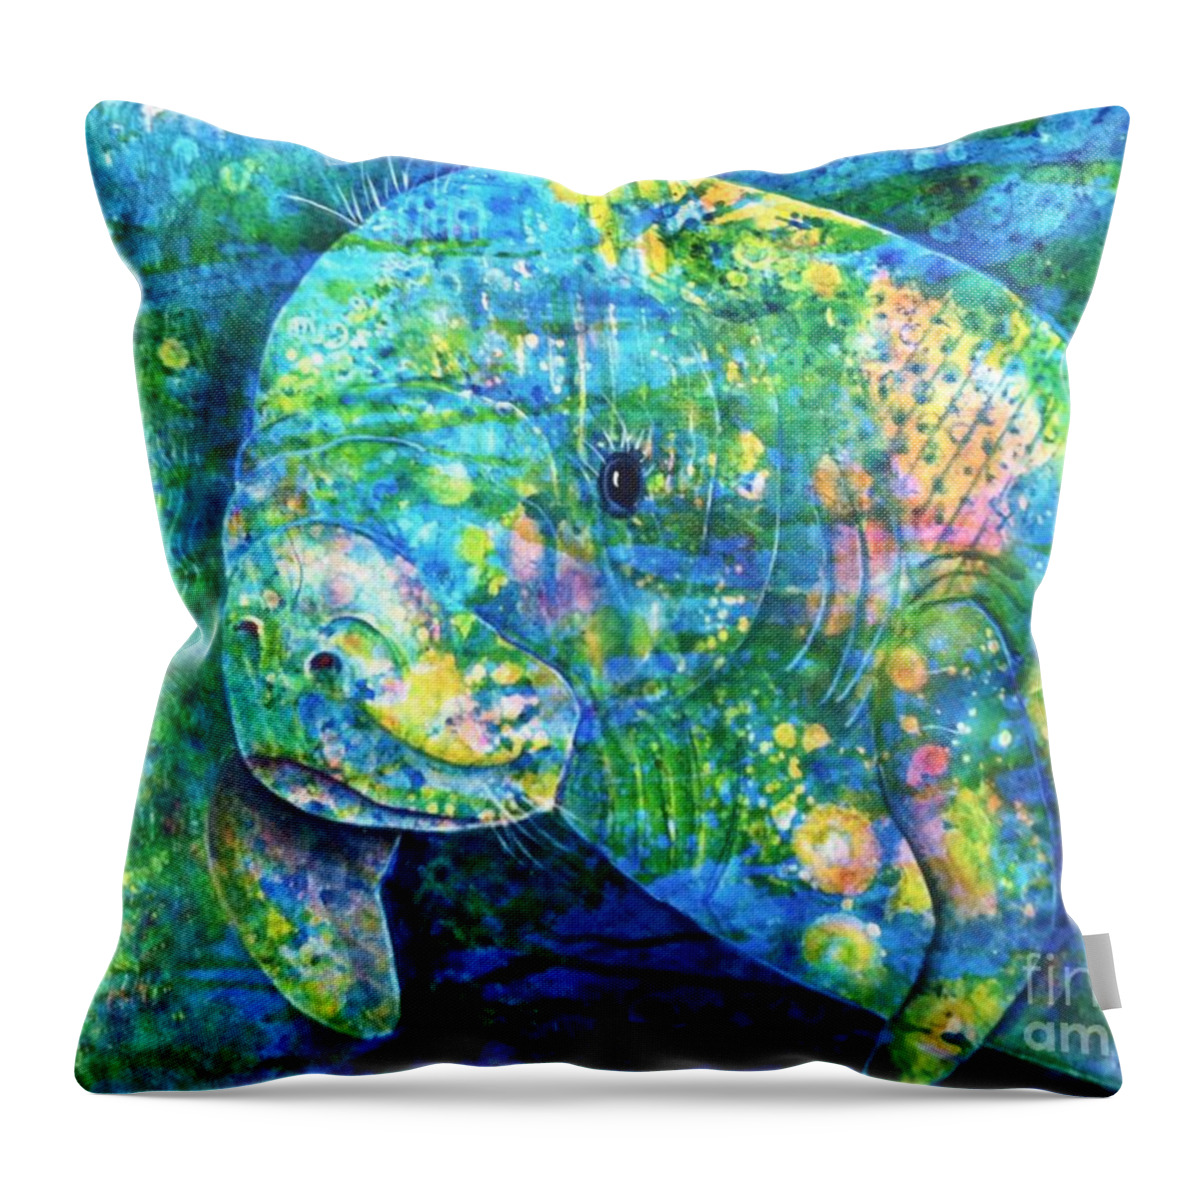 Manatee Throw Pillow featuring the painting Manatee by Midge Pippel